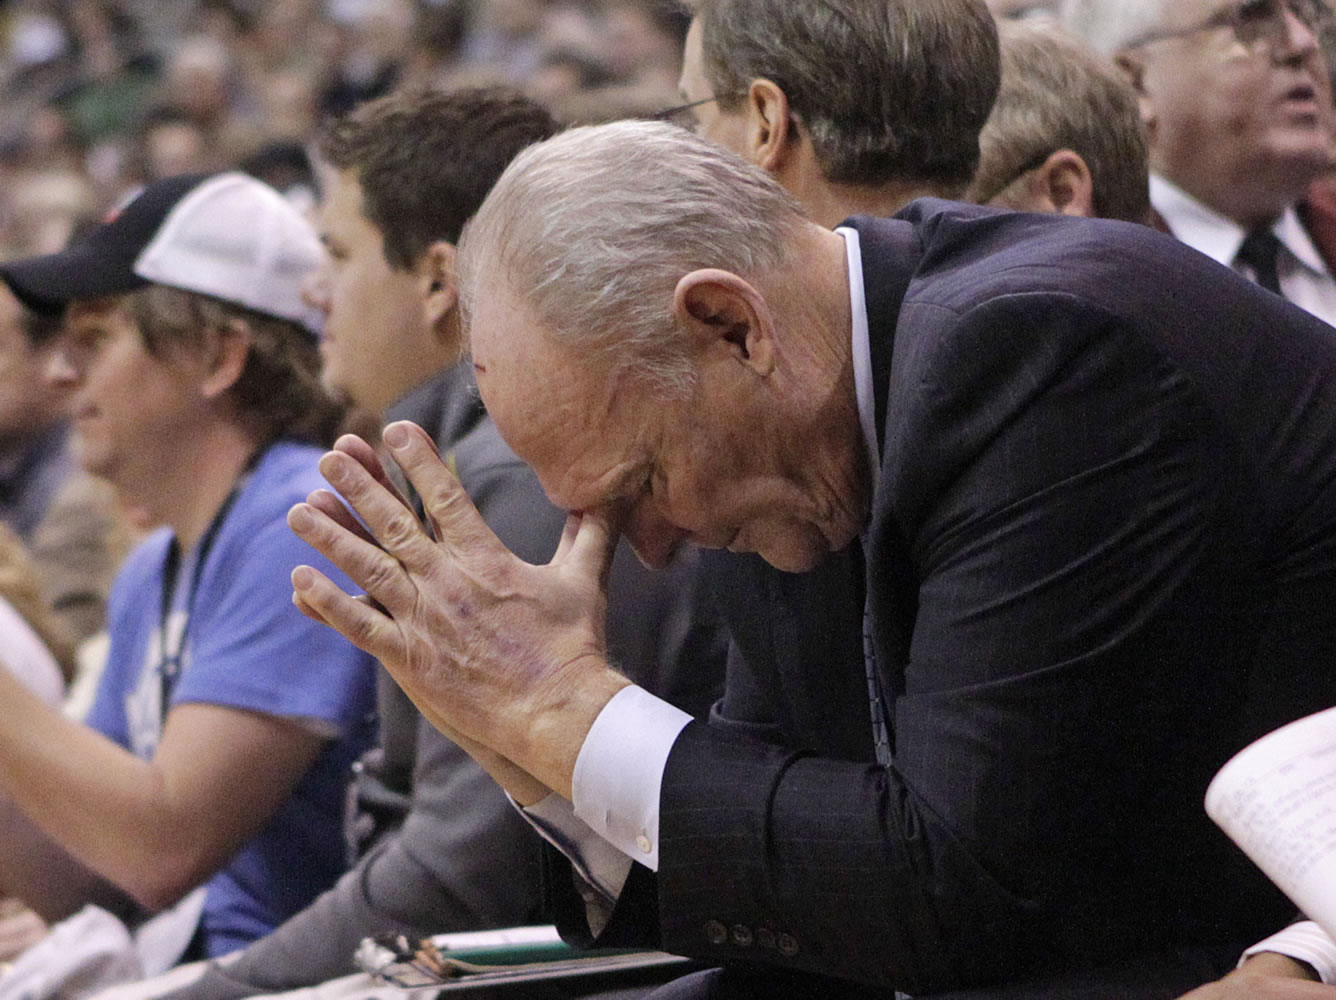 Coach George Karl did not have his contract renewed by the Denver Nuggets despite leading the team to the playoffs.